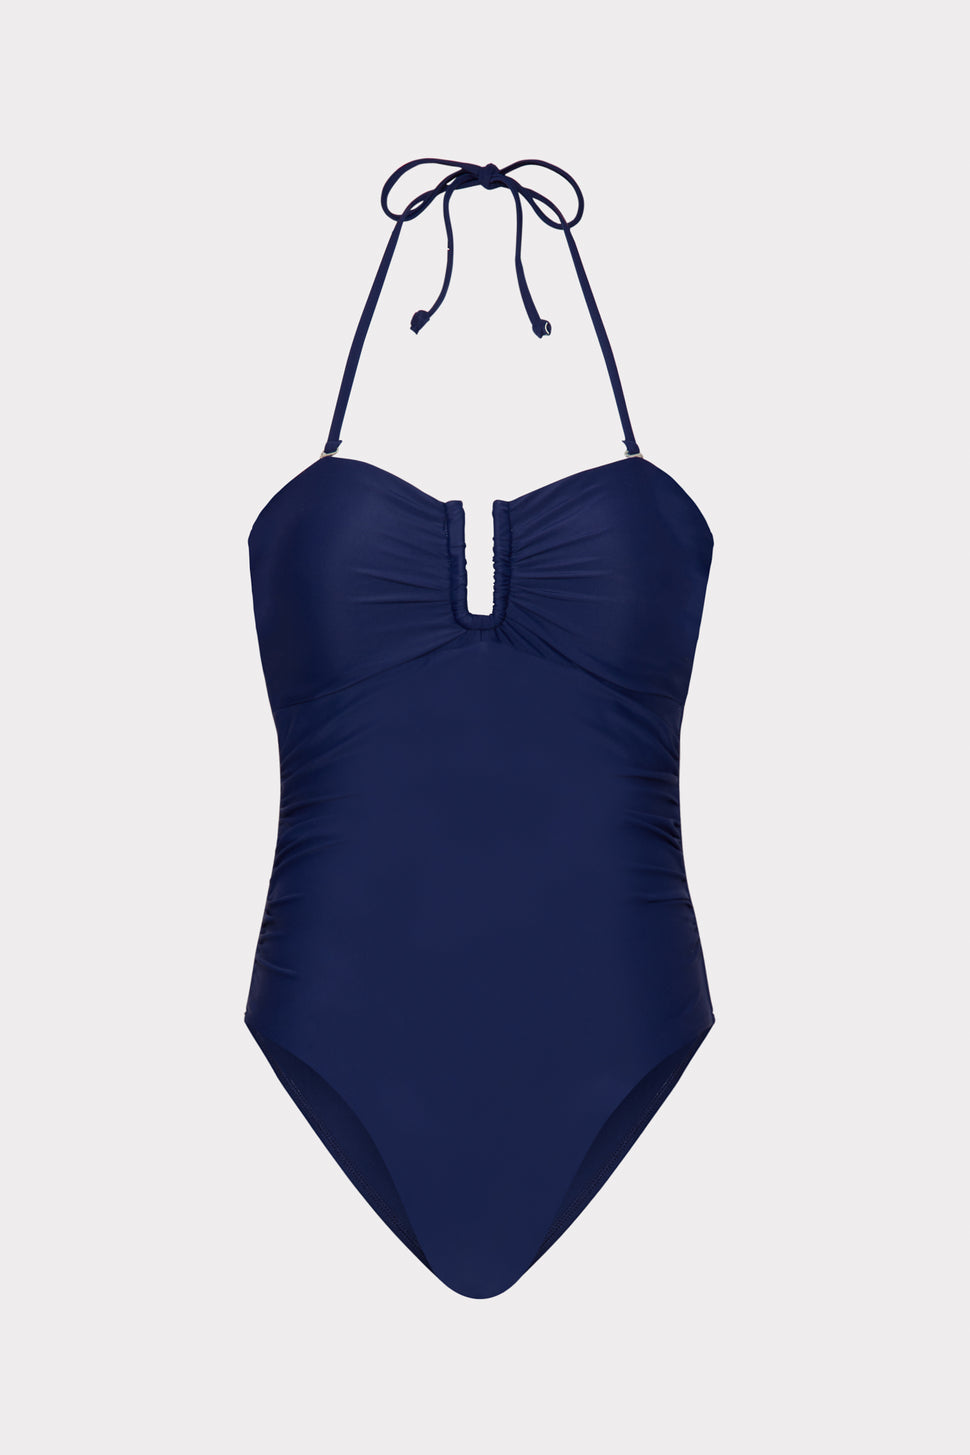 Randi Shiny Solid One Piece In Navy - MILLY in Navy | MILLY